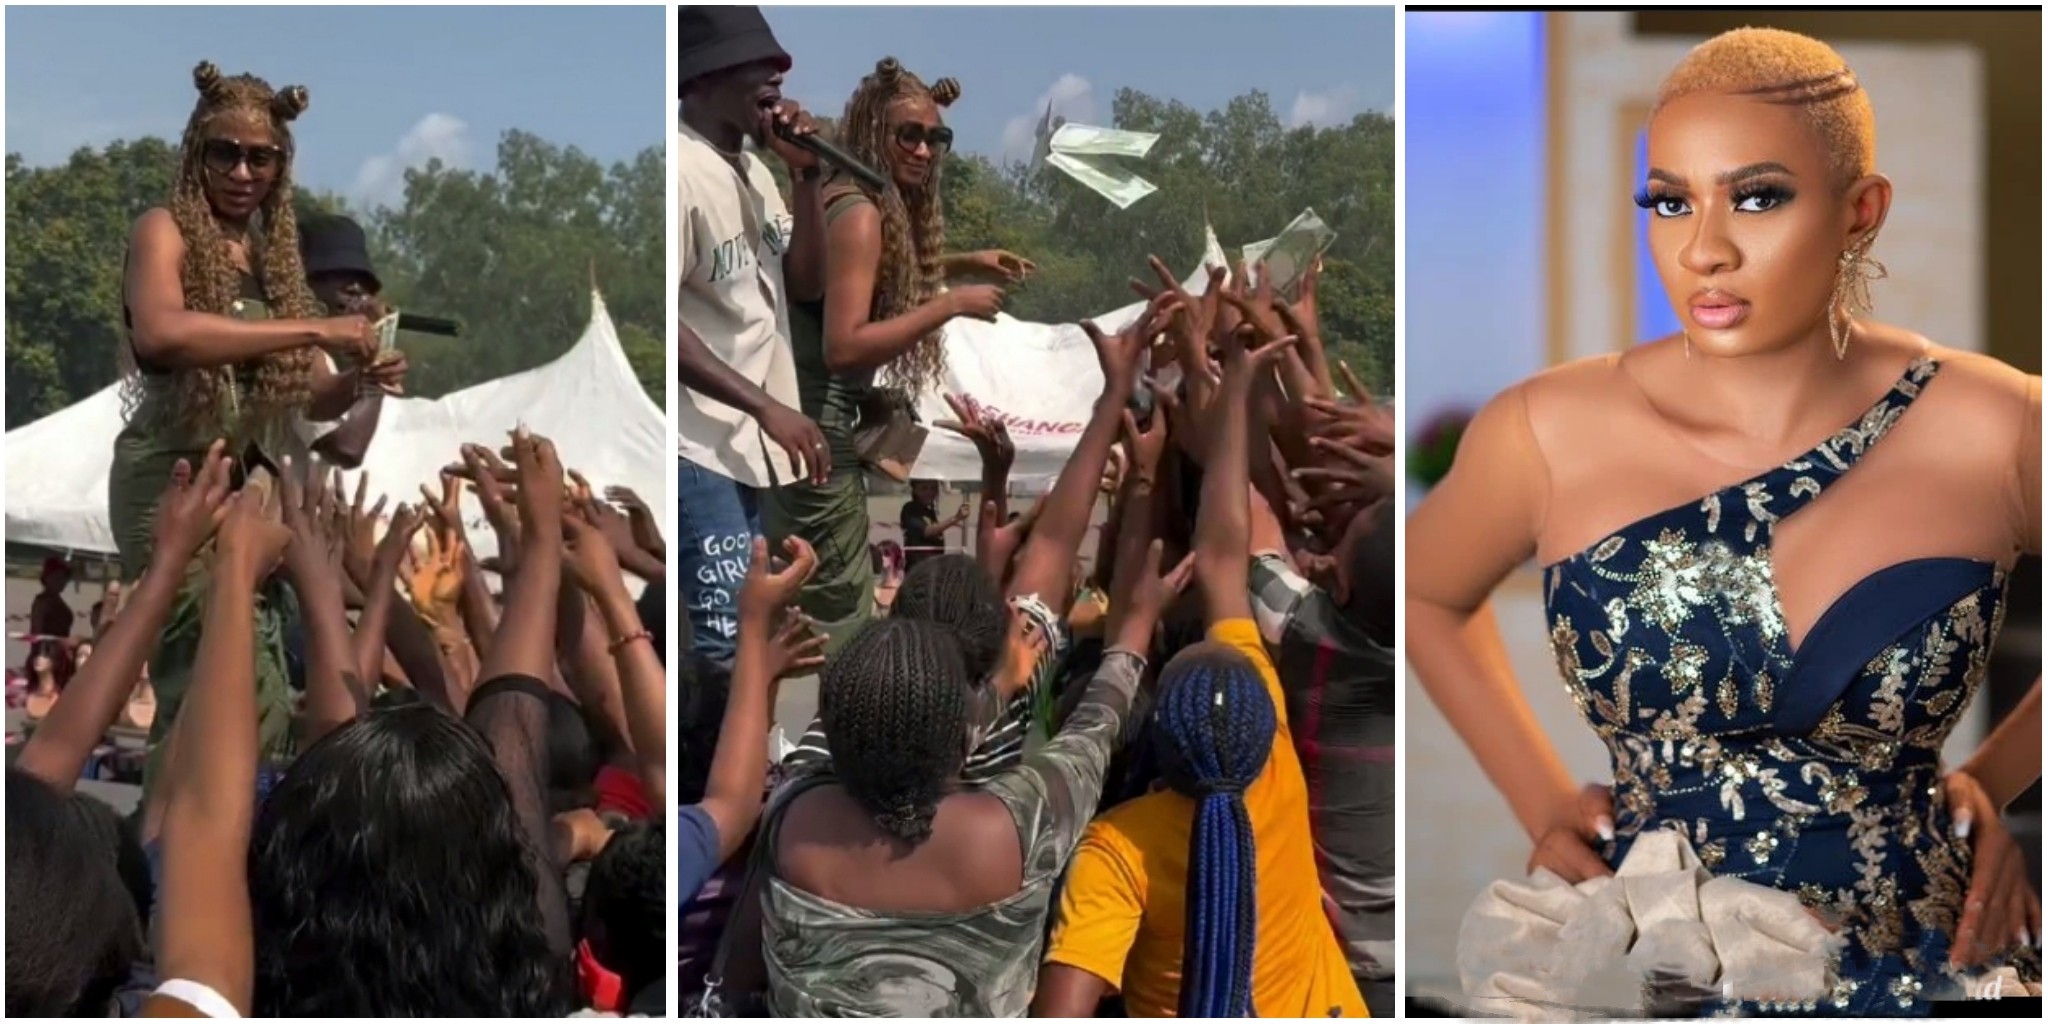 She don cash out – Reactions trail trending clip of May Edochie raining cash on fans at Enugu event